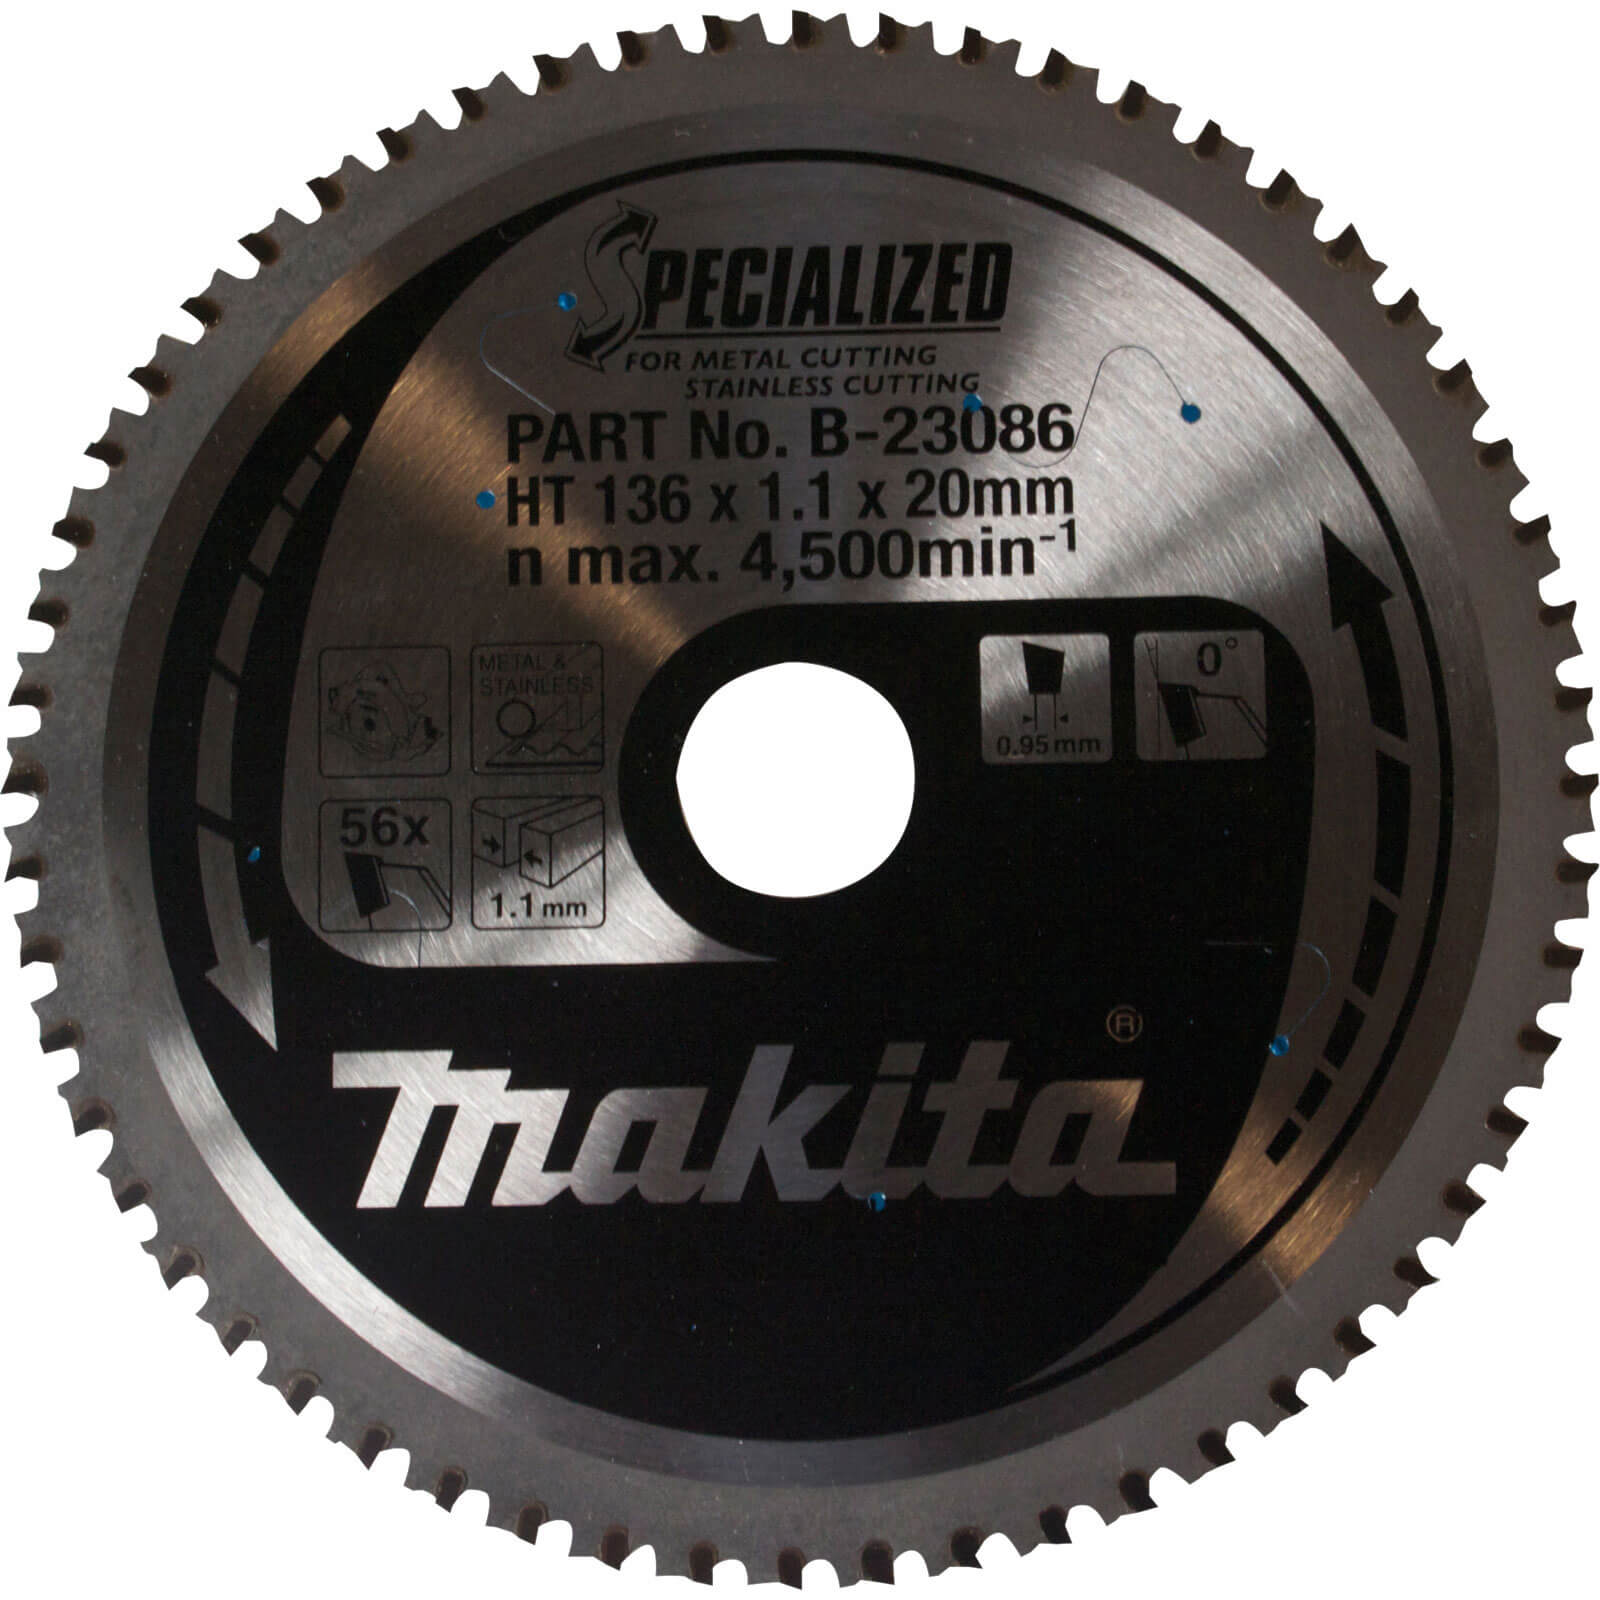 Image of Makita SPECIALIZED Stainless Steel Cutting Saw Blade 136mm 56T 20mm